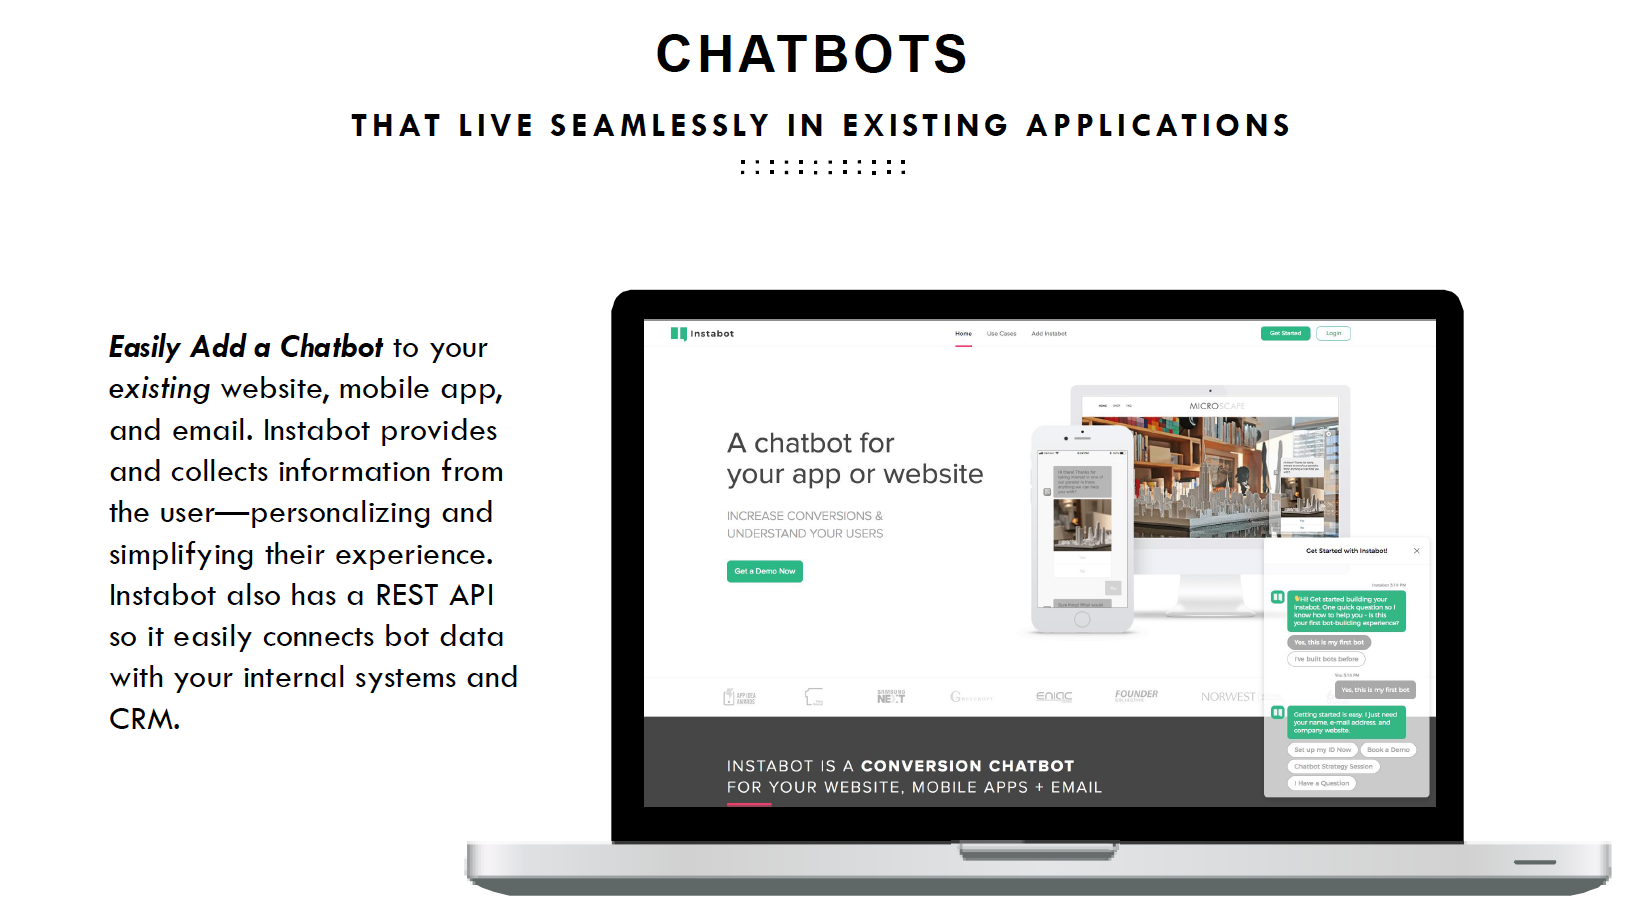 Chatbots that live seamlessly in existing applications